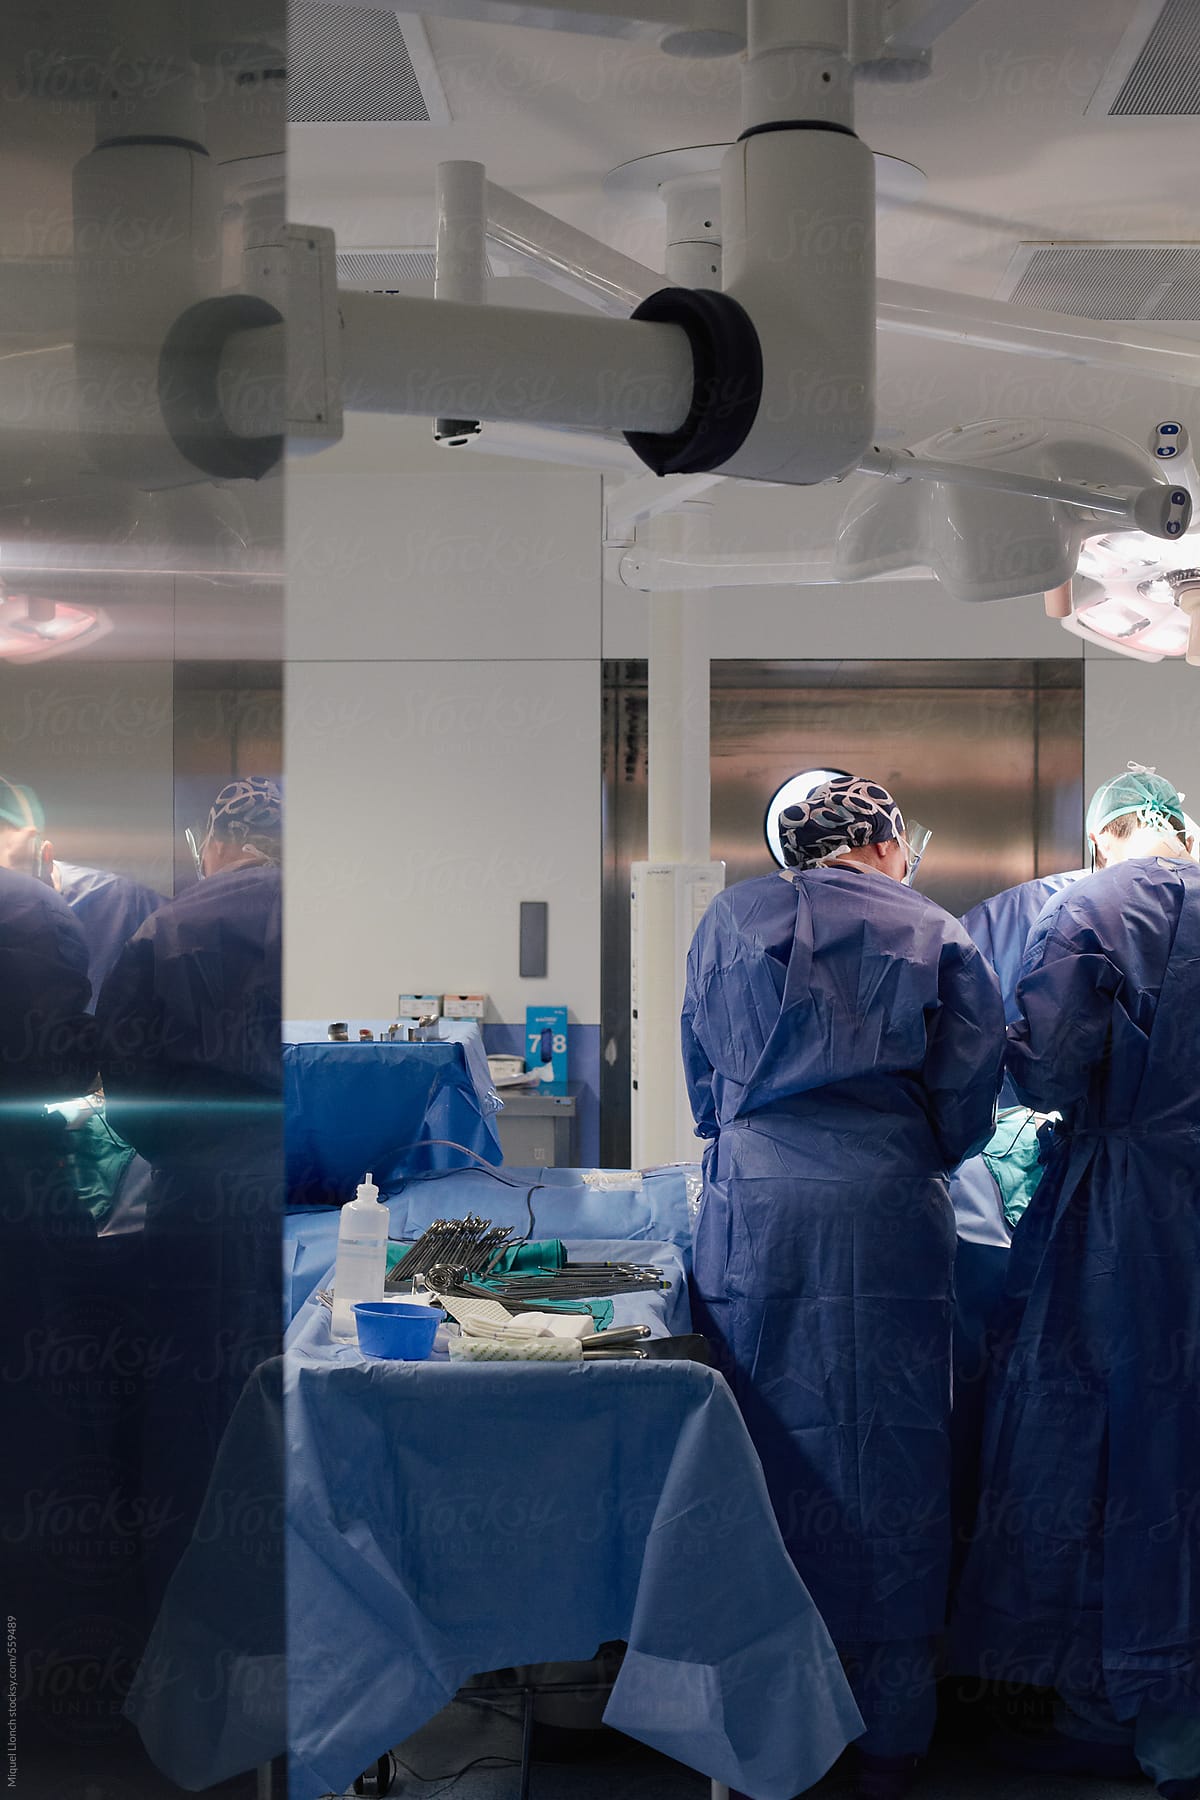 Surgical staff working in the operating room